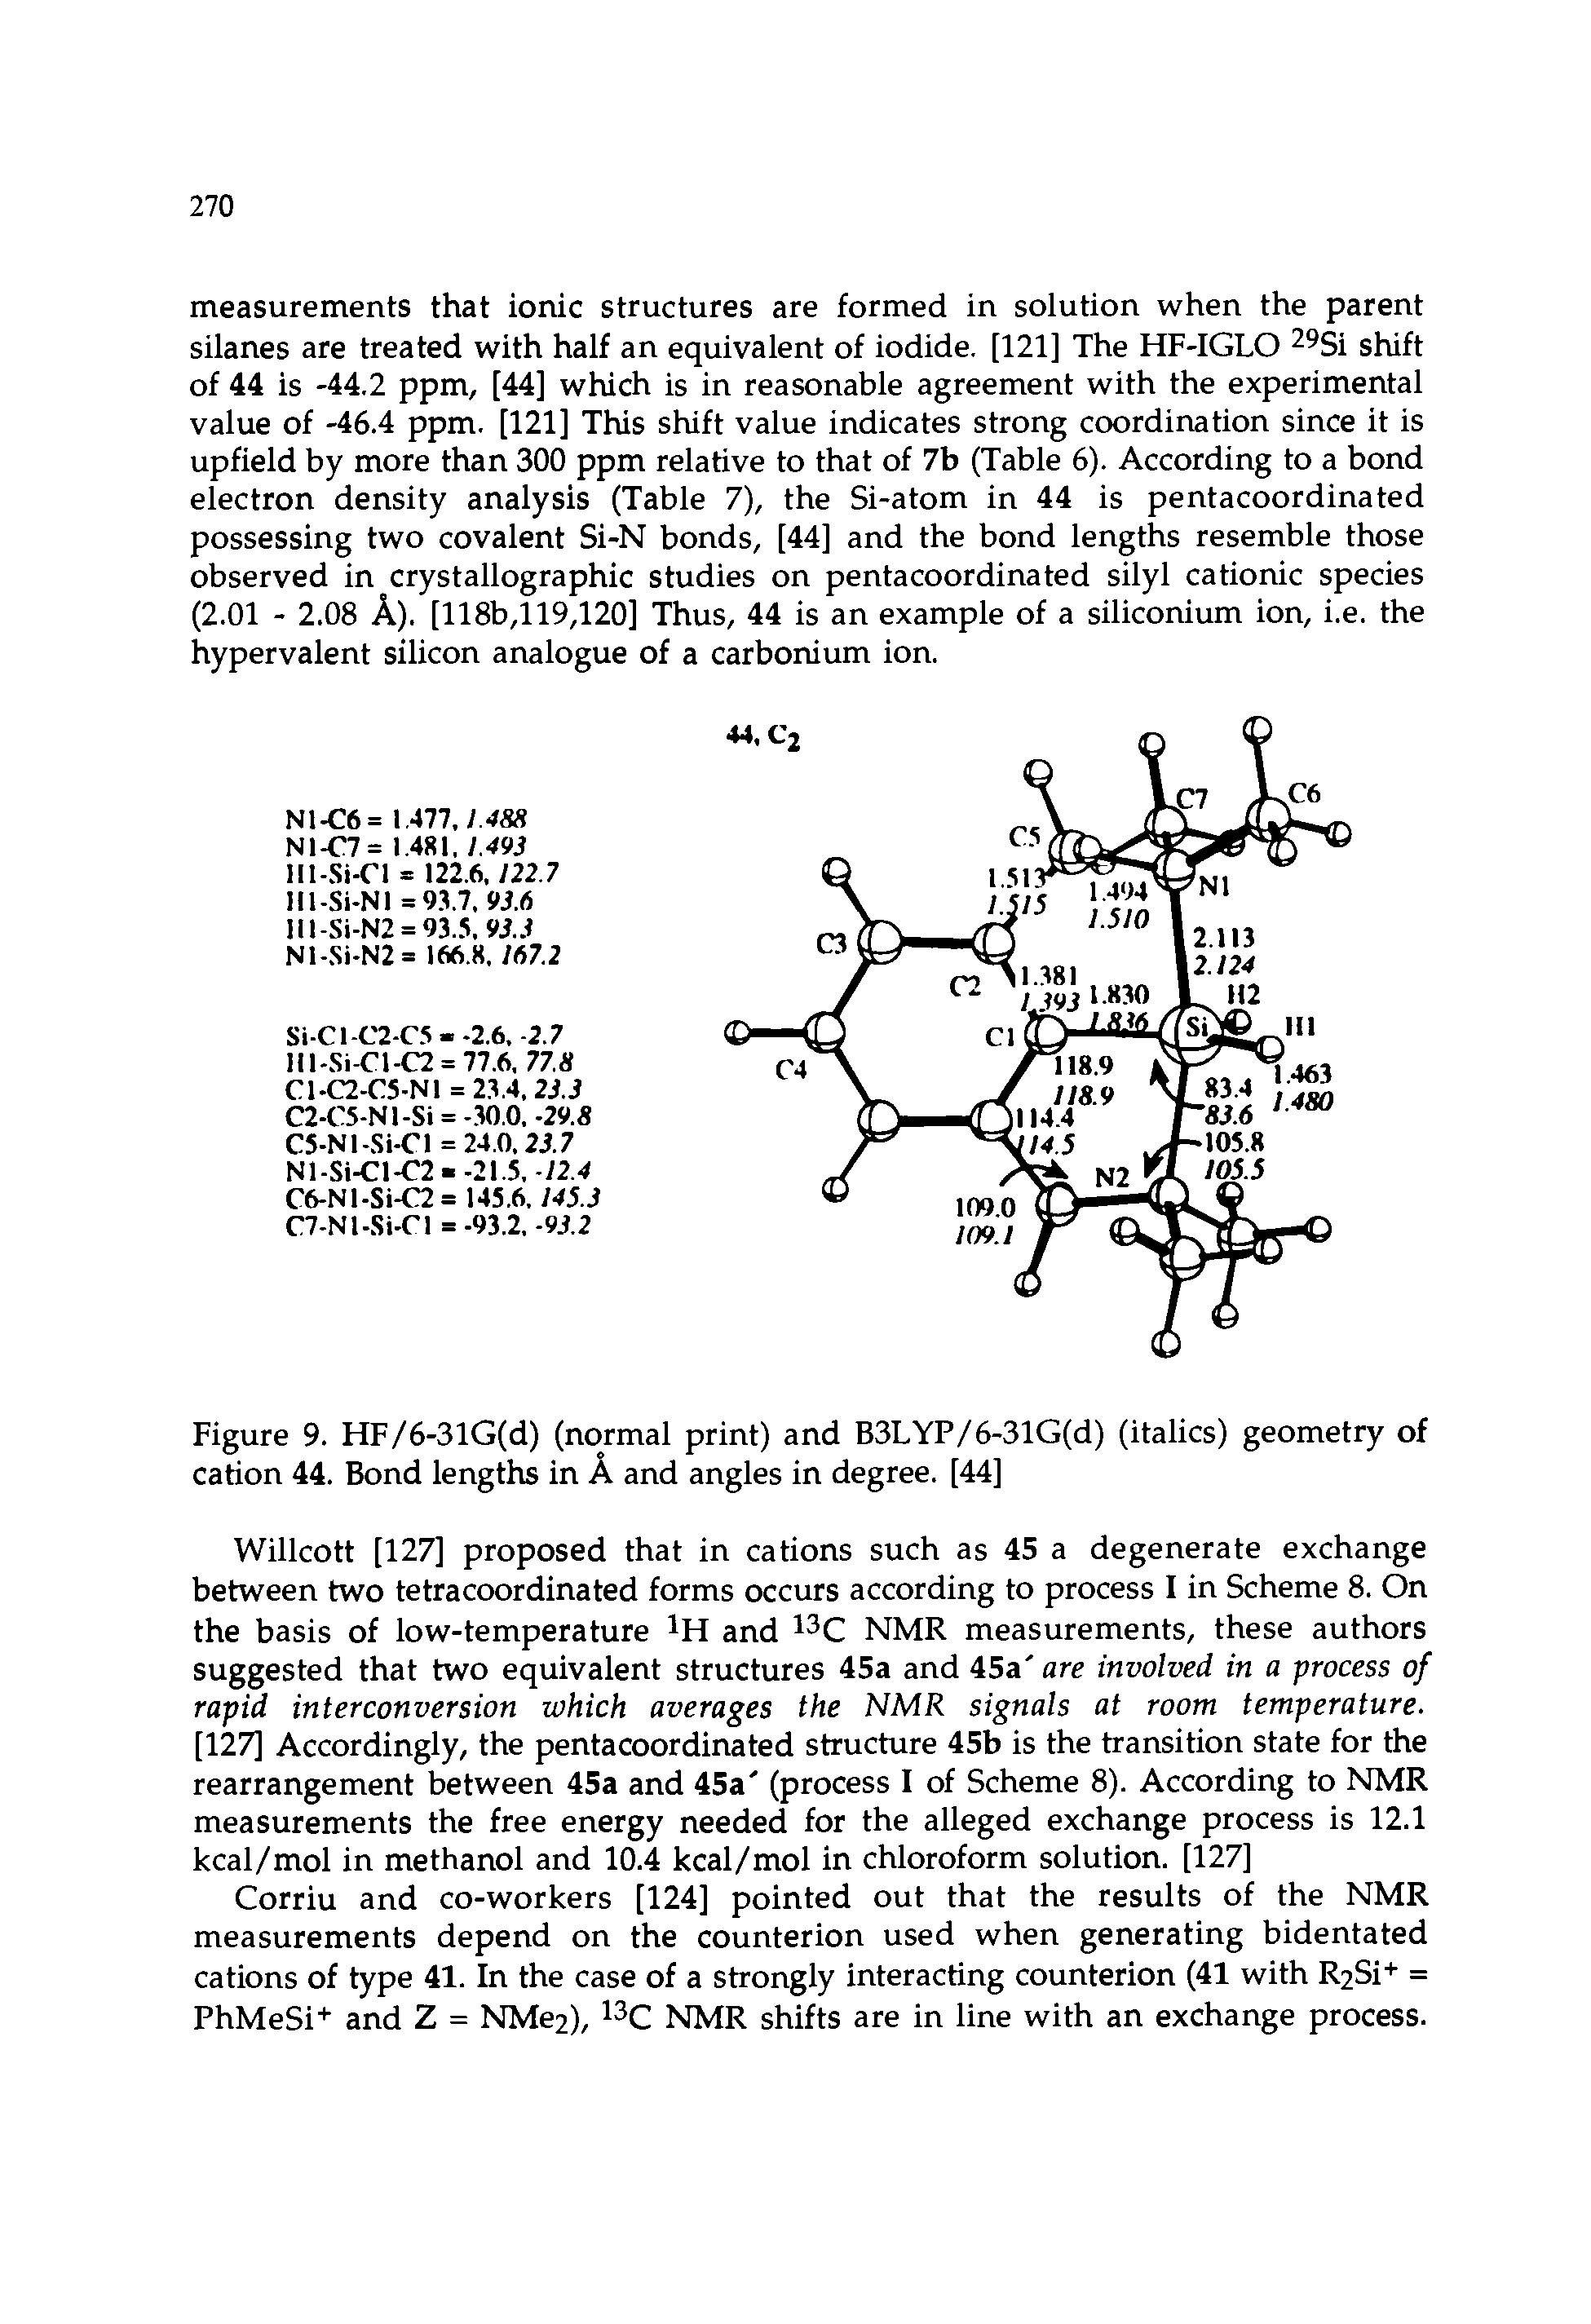 Figure 9. HF/6-3lG(d) (normal print) and B3LYP/6-31G(d) (italics) geometry of cation 44. Bond lengths in A and angles in degree. [44]...